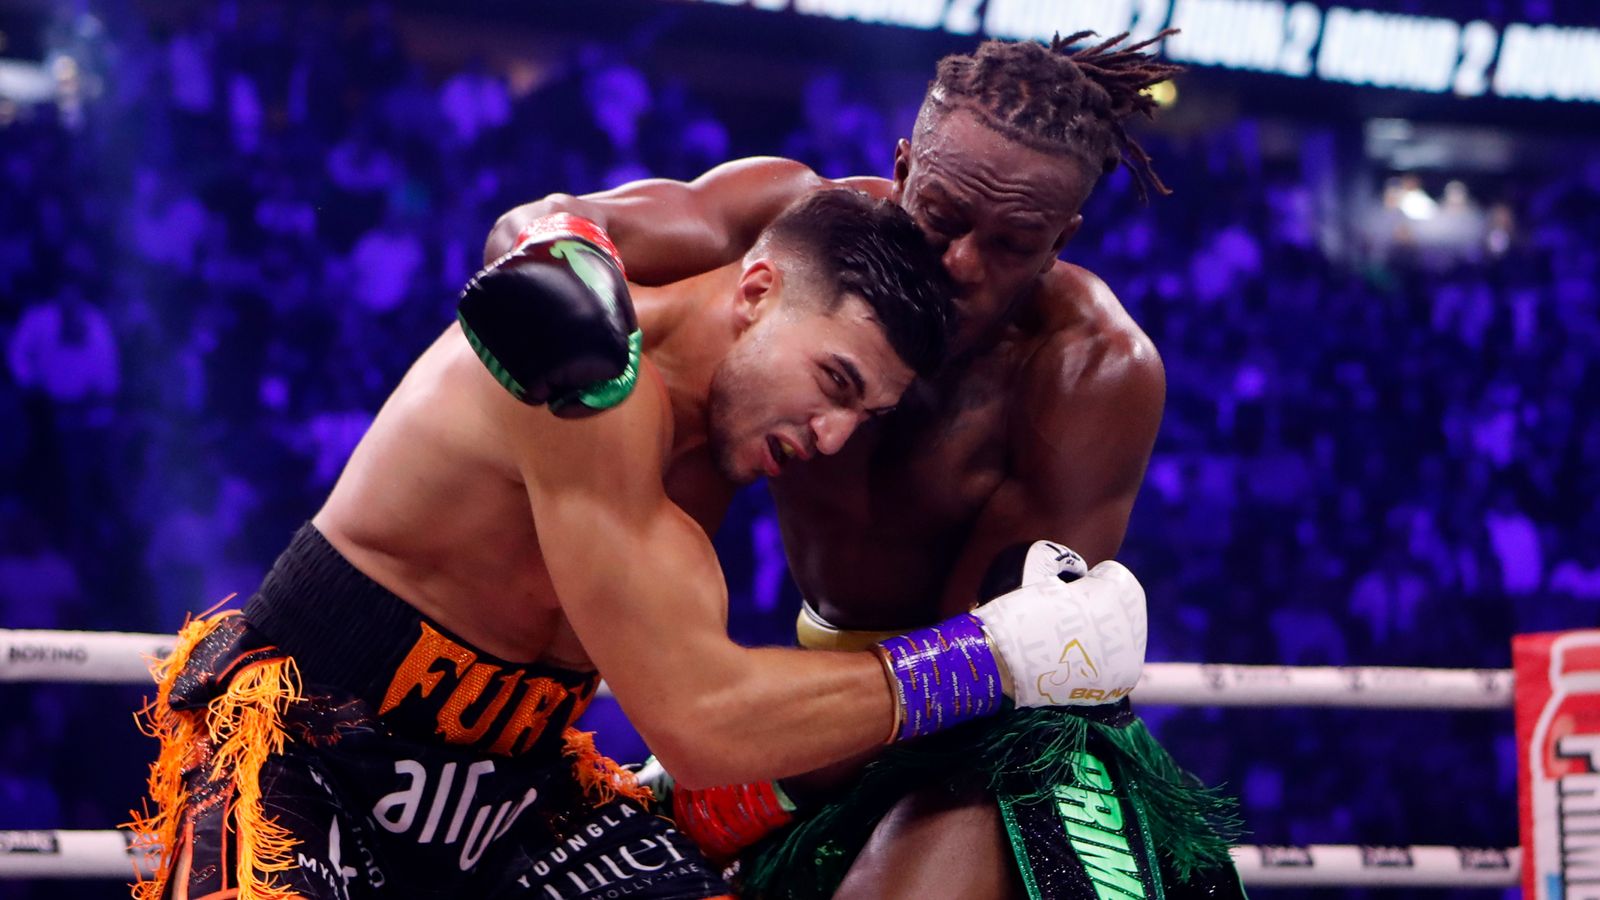 Tommy Fury (left) and KSI in action during their bout during the MF and DAZN: X Series event at the AO Arena, Manchester